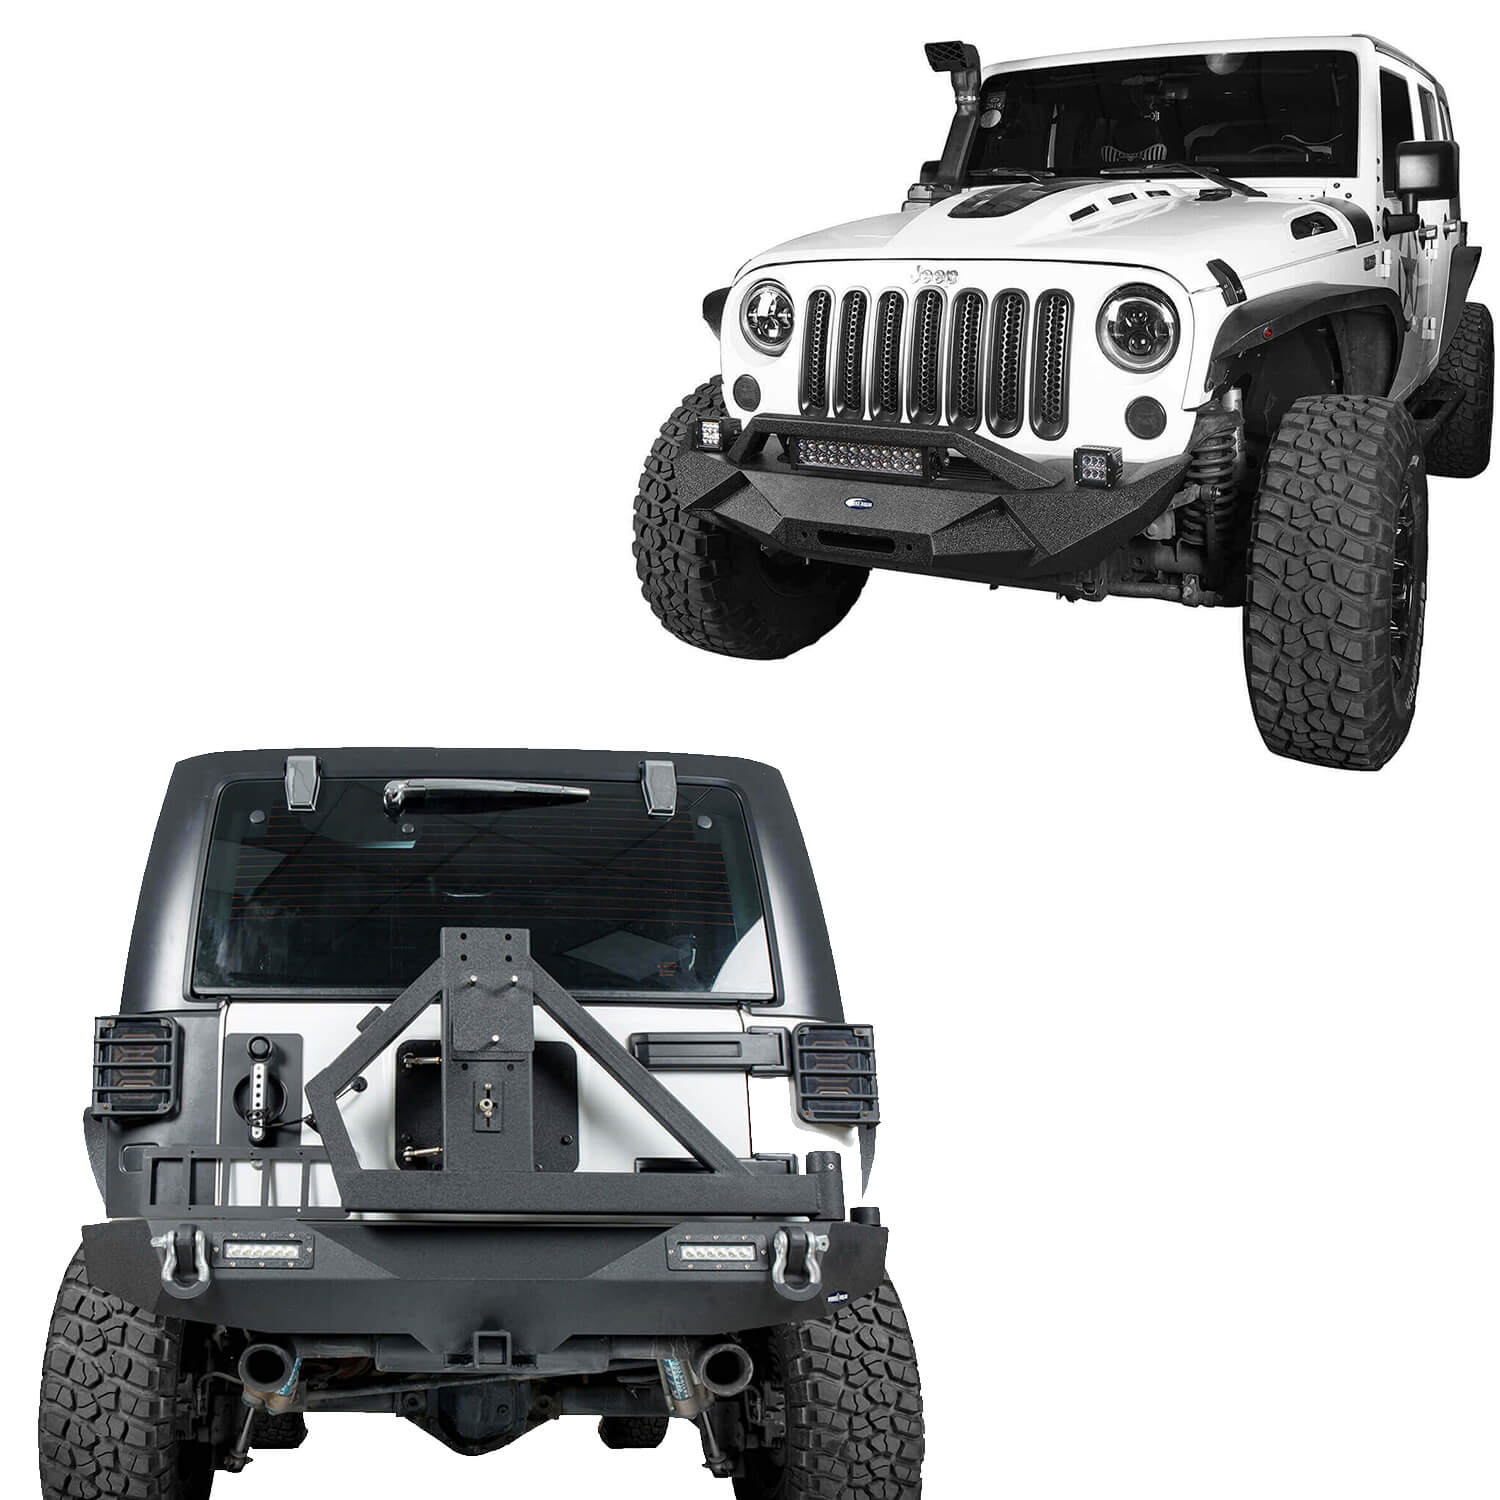 Jeep Wrangler JK vs. JKU: What's the Difference? - Off-Roading Pro